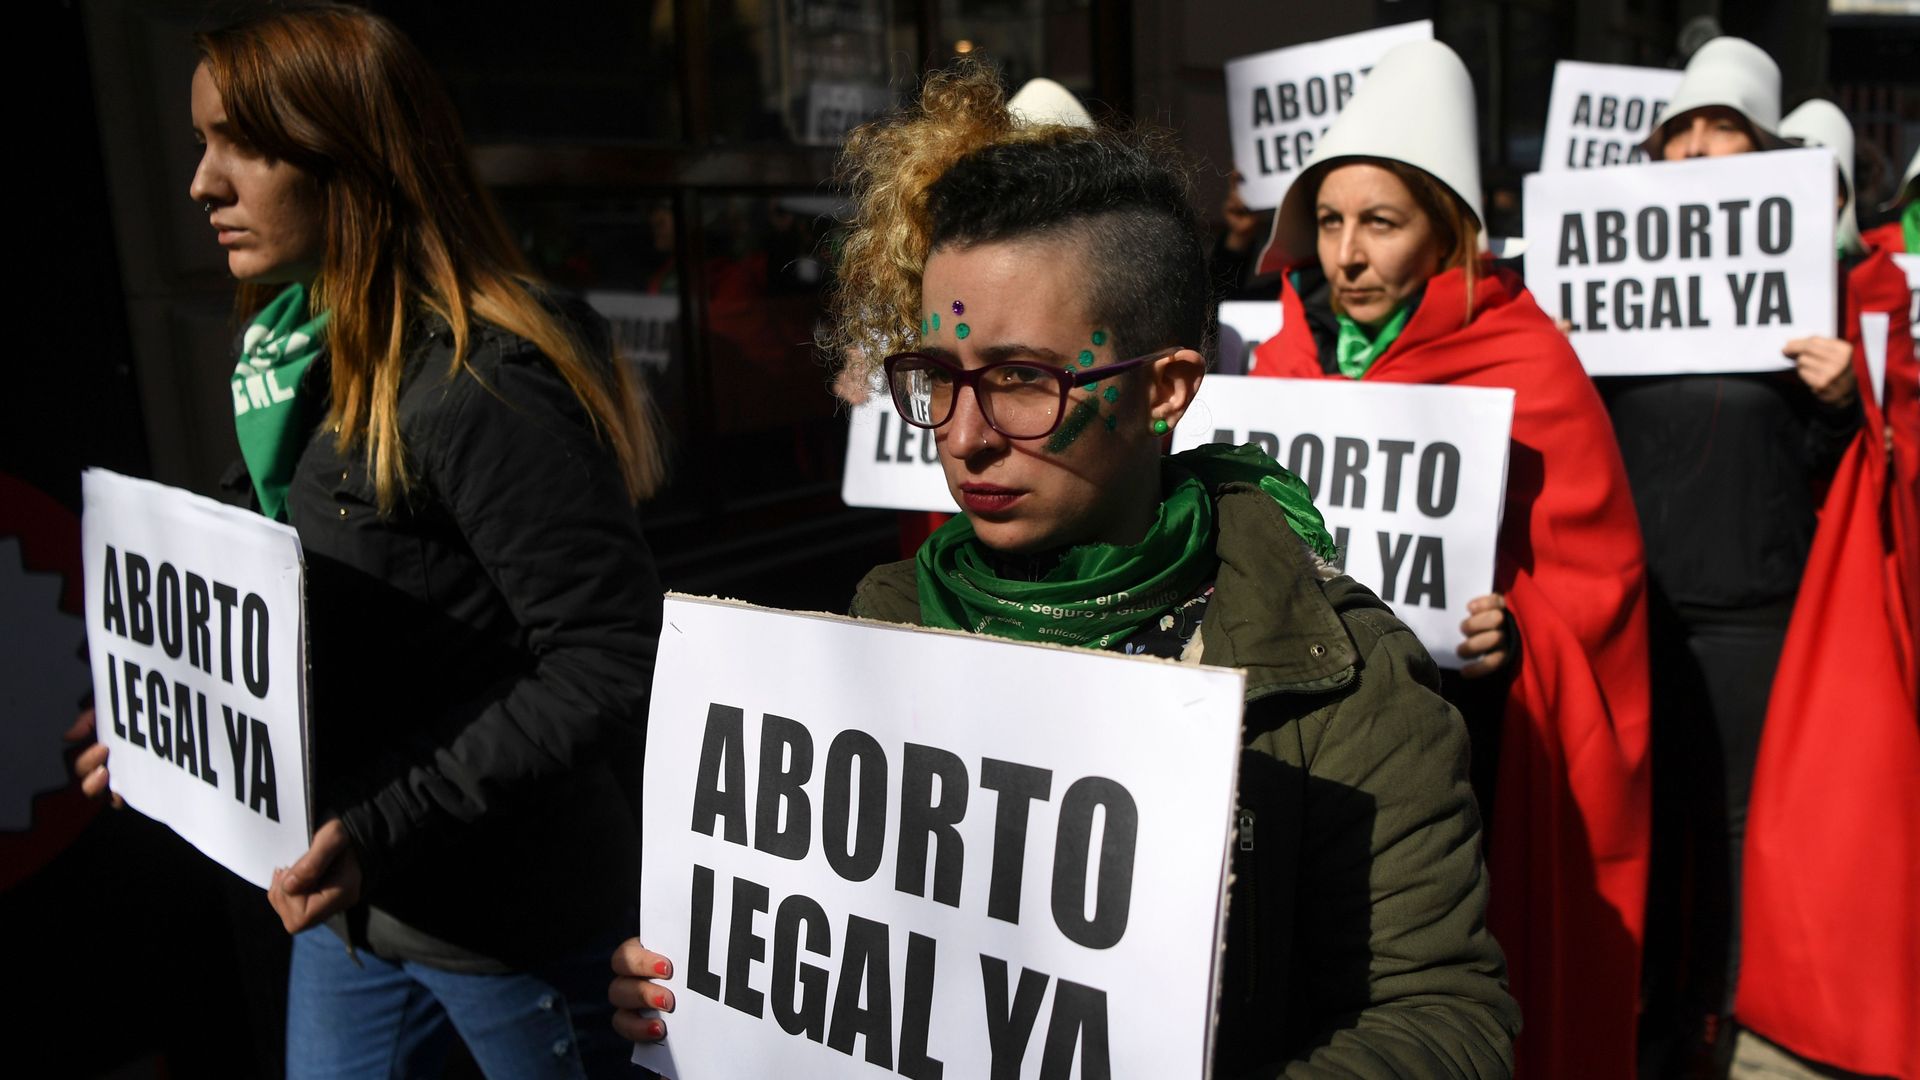 Demonstrators in support of the legalization of abortion outside the National Congress in Buenos Aires. Photo: Eitan Abramovich/AFP/Getty Images